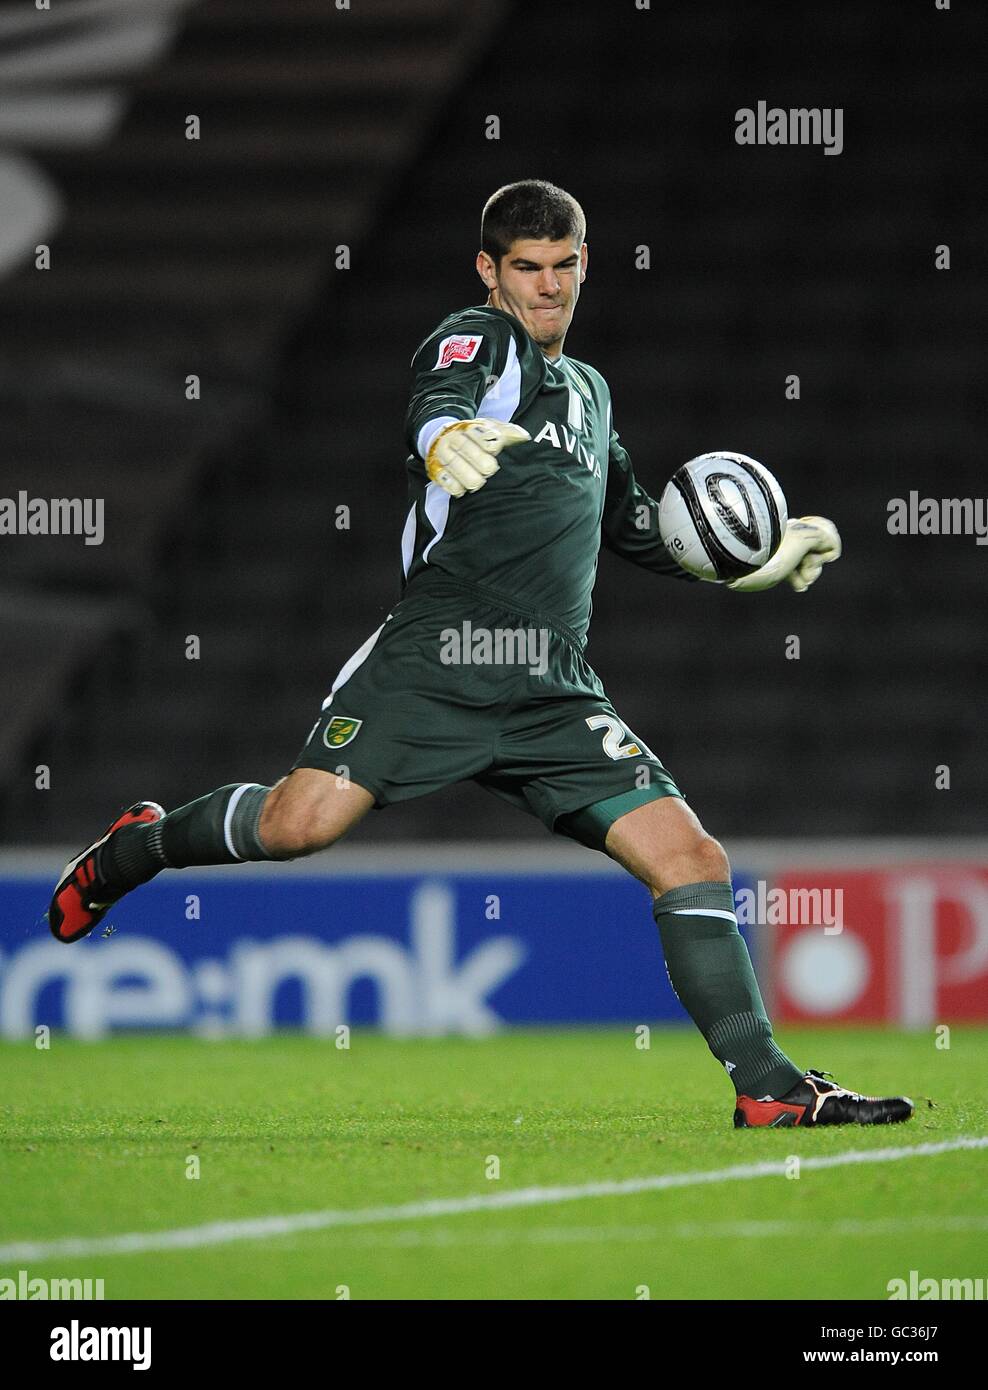 Soccer - Coca Cola Football League One - MK Dons v Norwich City - stadium MK. Fraser Forster, Norwich City goalkeeper Stock Photo